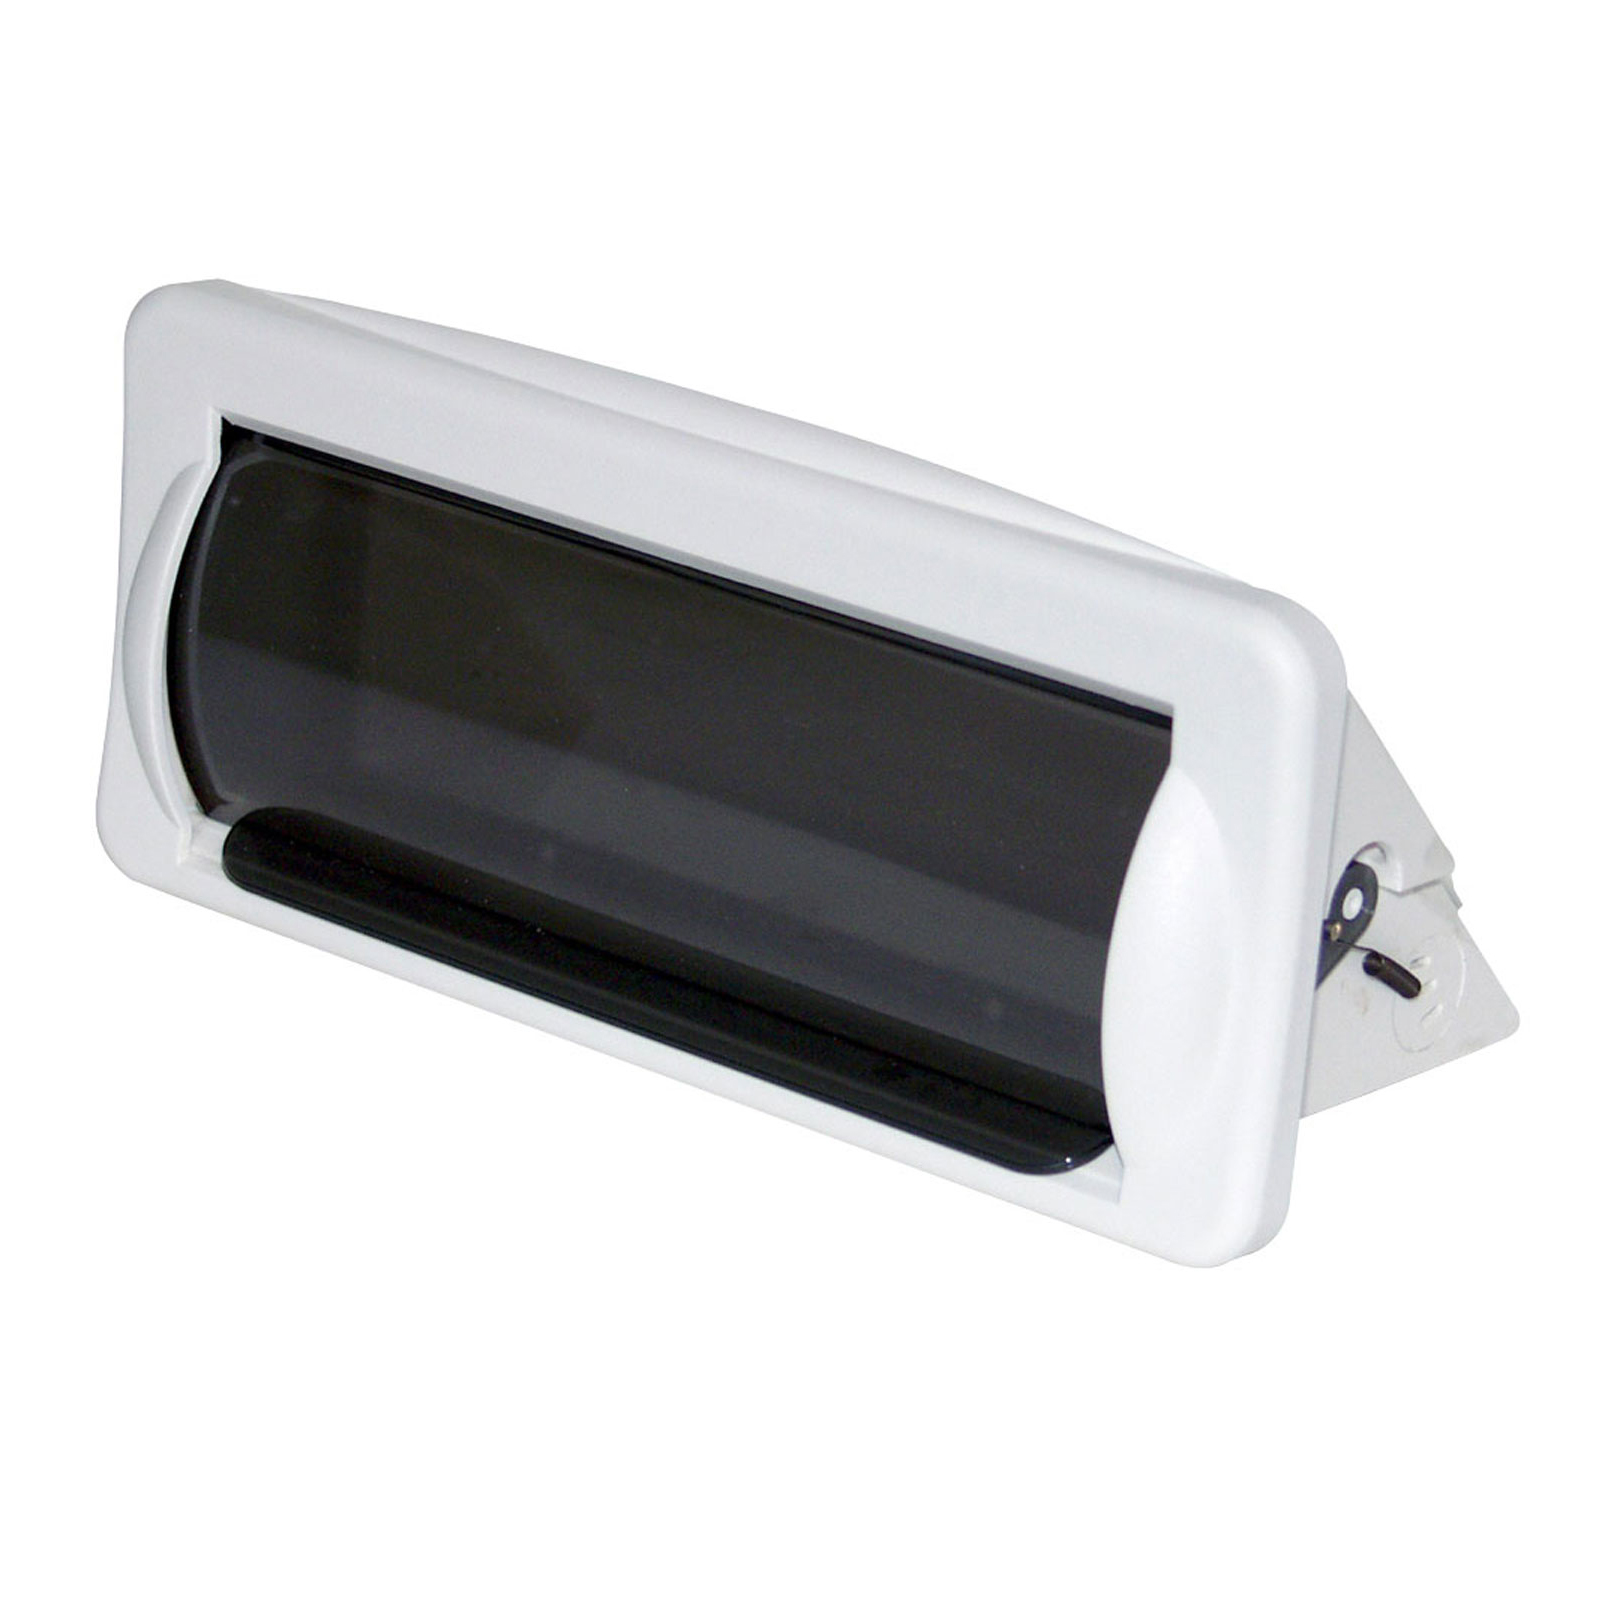 Pyle White Water Resistant Radio Shield - image 1 of 1